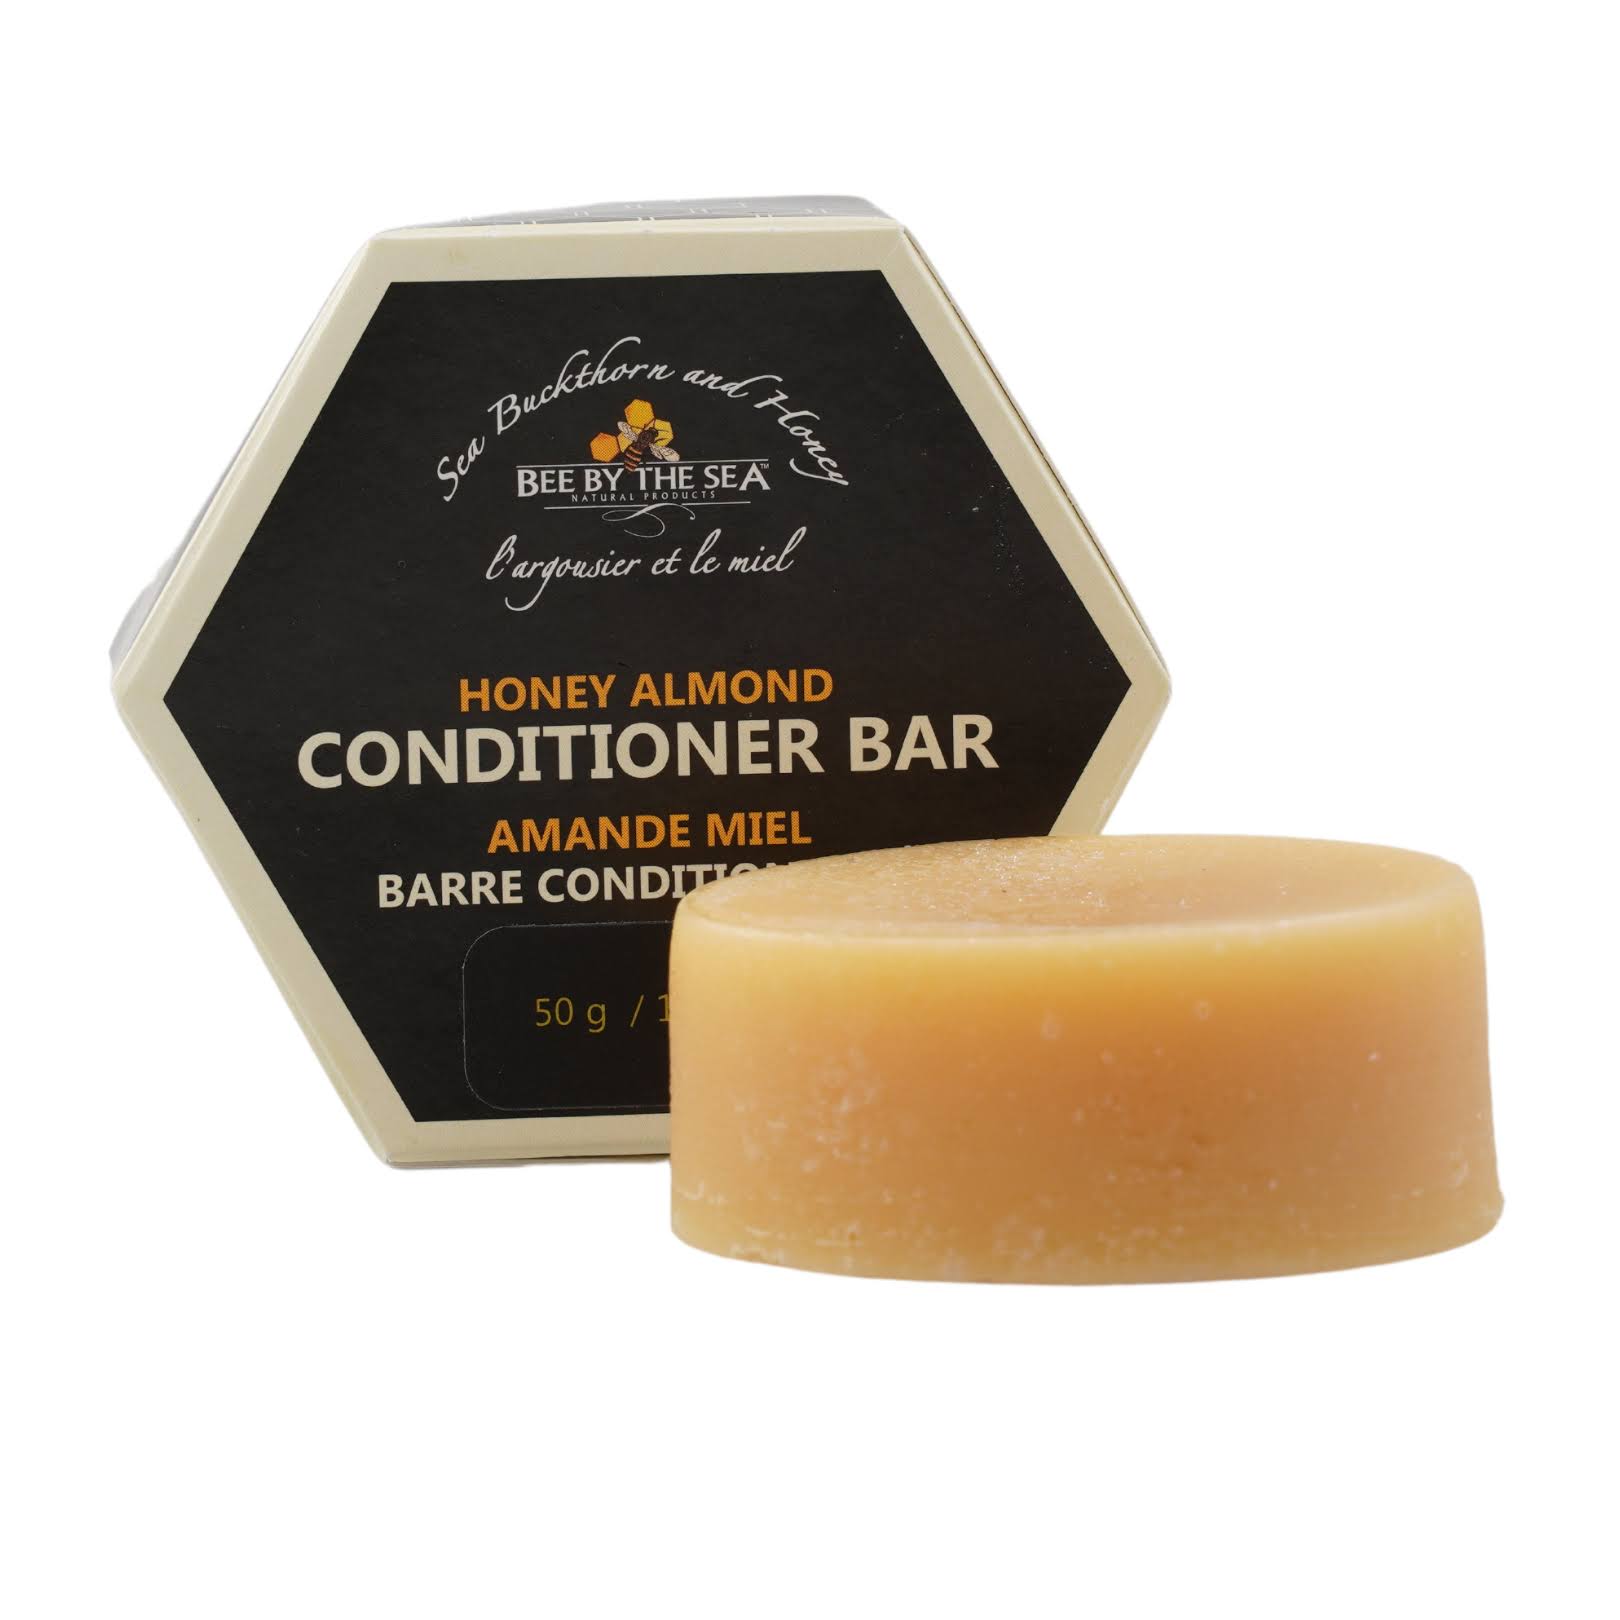 Bee by The Sea Buckthorn and Honey almond Conditioner Bar to Soft Hair- 1.8 oz